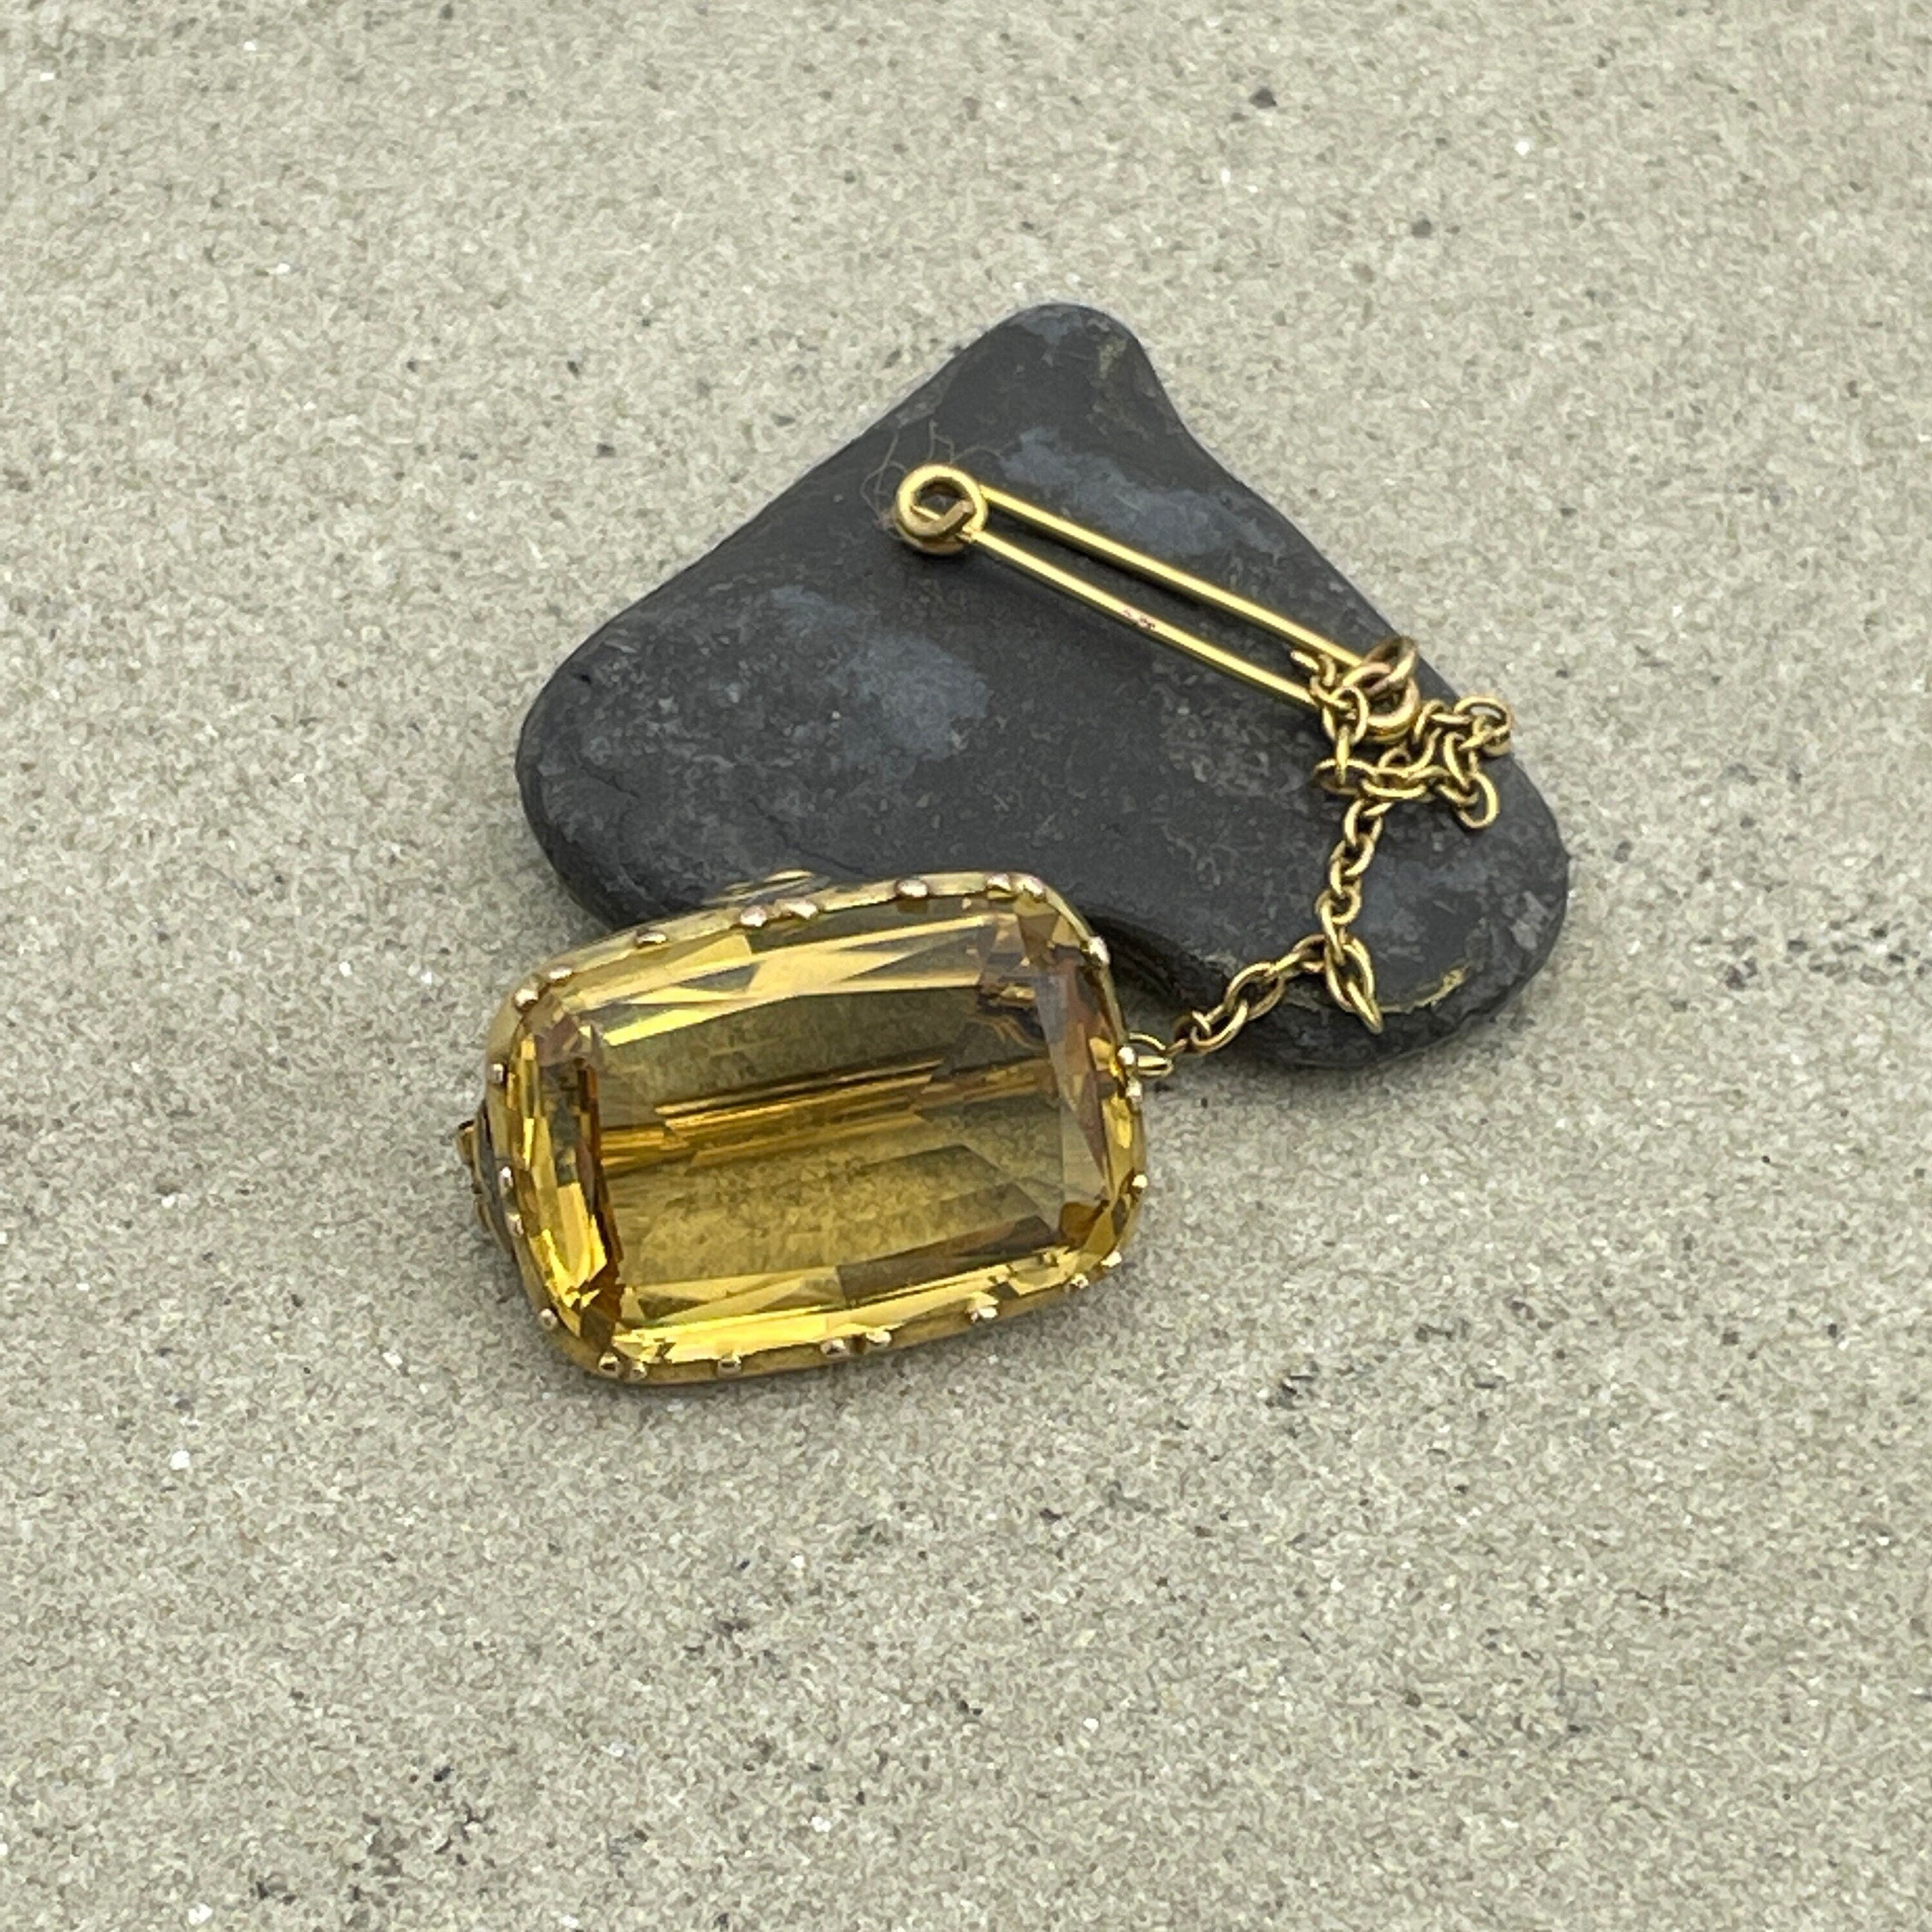 Antique, 15ct Gold, Faceted Citrine Brooch